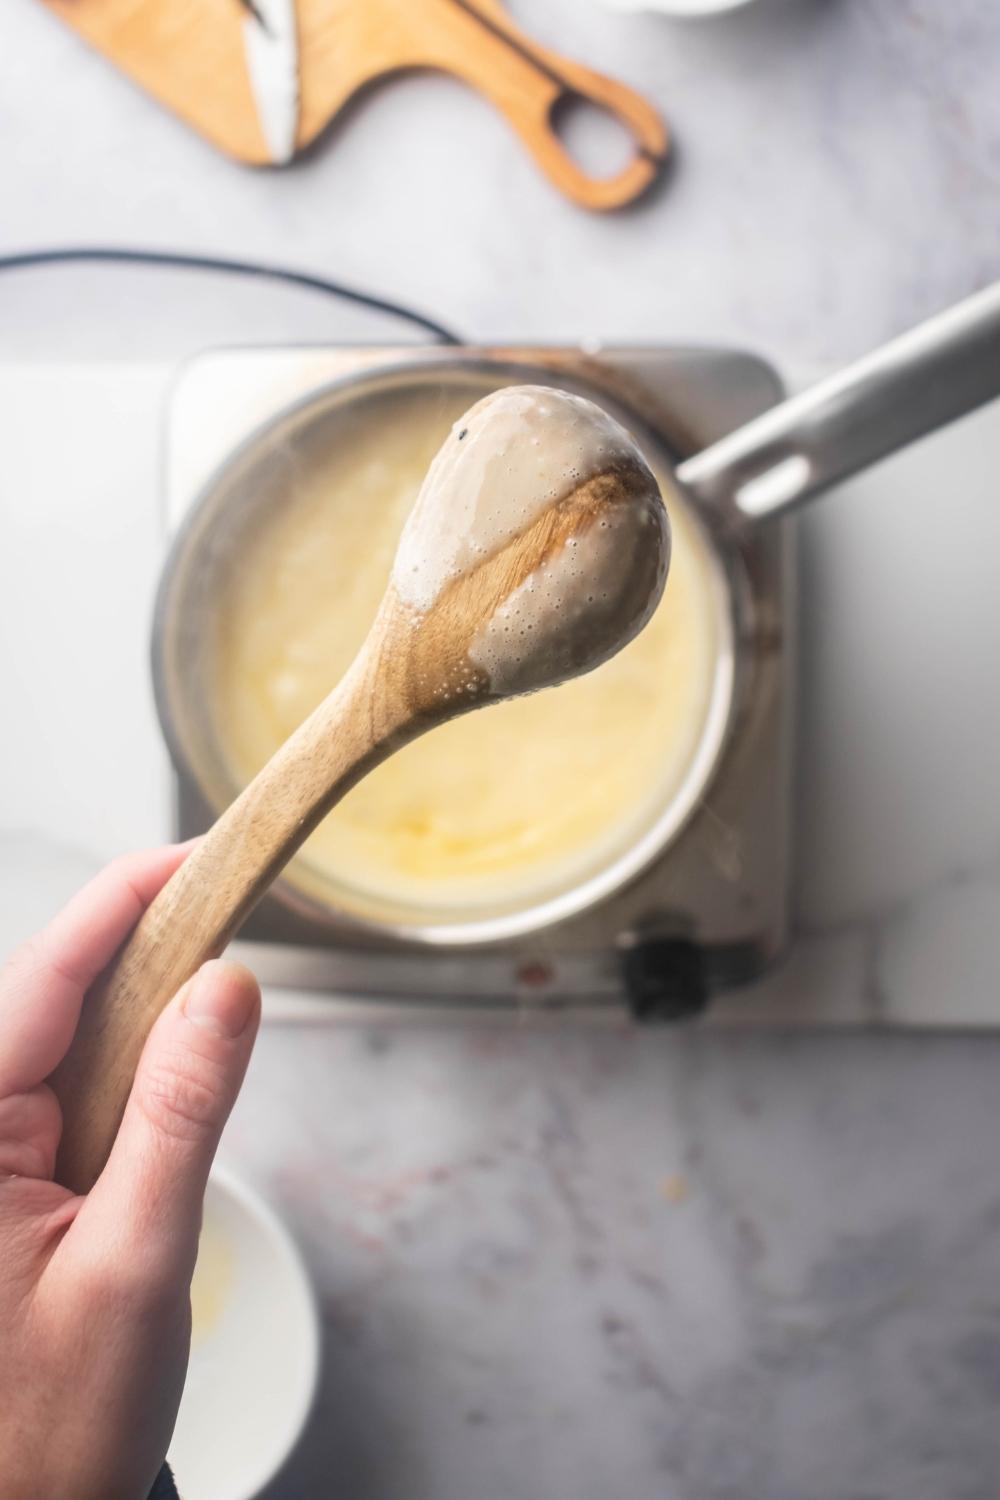 A hand holding a spoon with crème brûlée filling on it with a streak out of the middle. The spoon is being held over a pot filled with crème brûlée on top of a burner on a white counter.